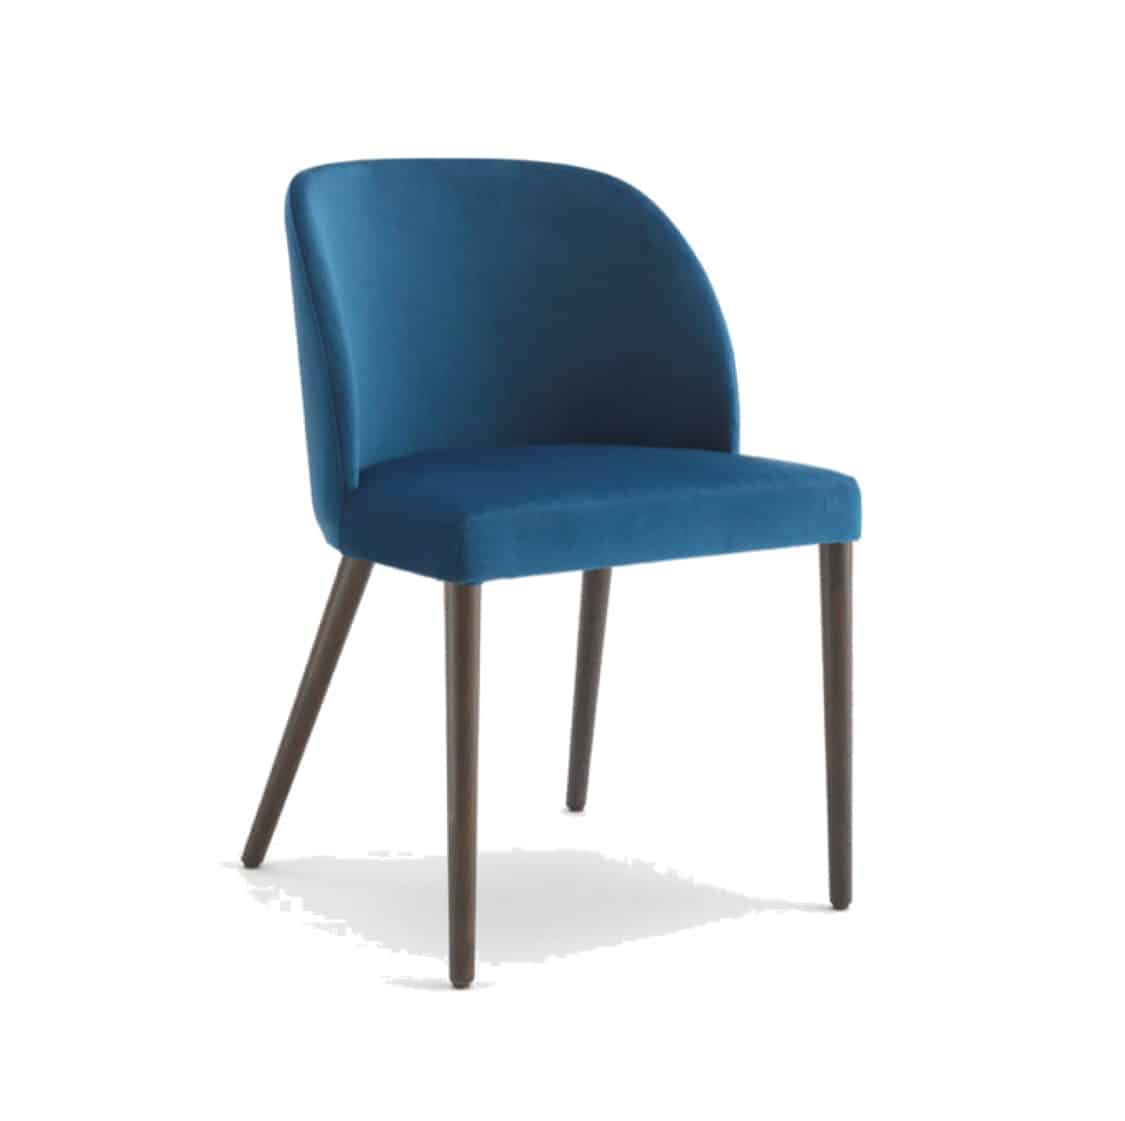 Camille Side Chair Malina at DeFrae Contract Furniture Wooden Legs